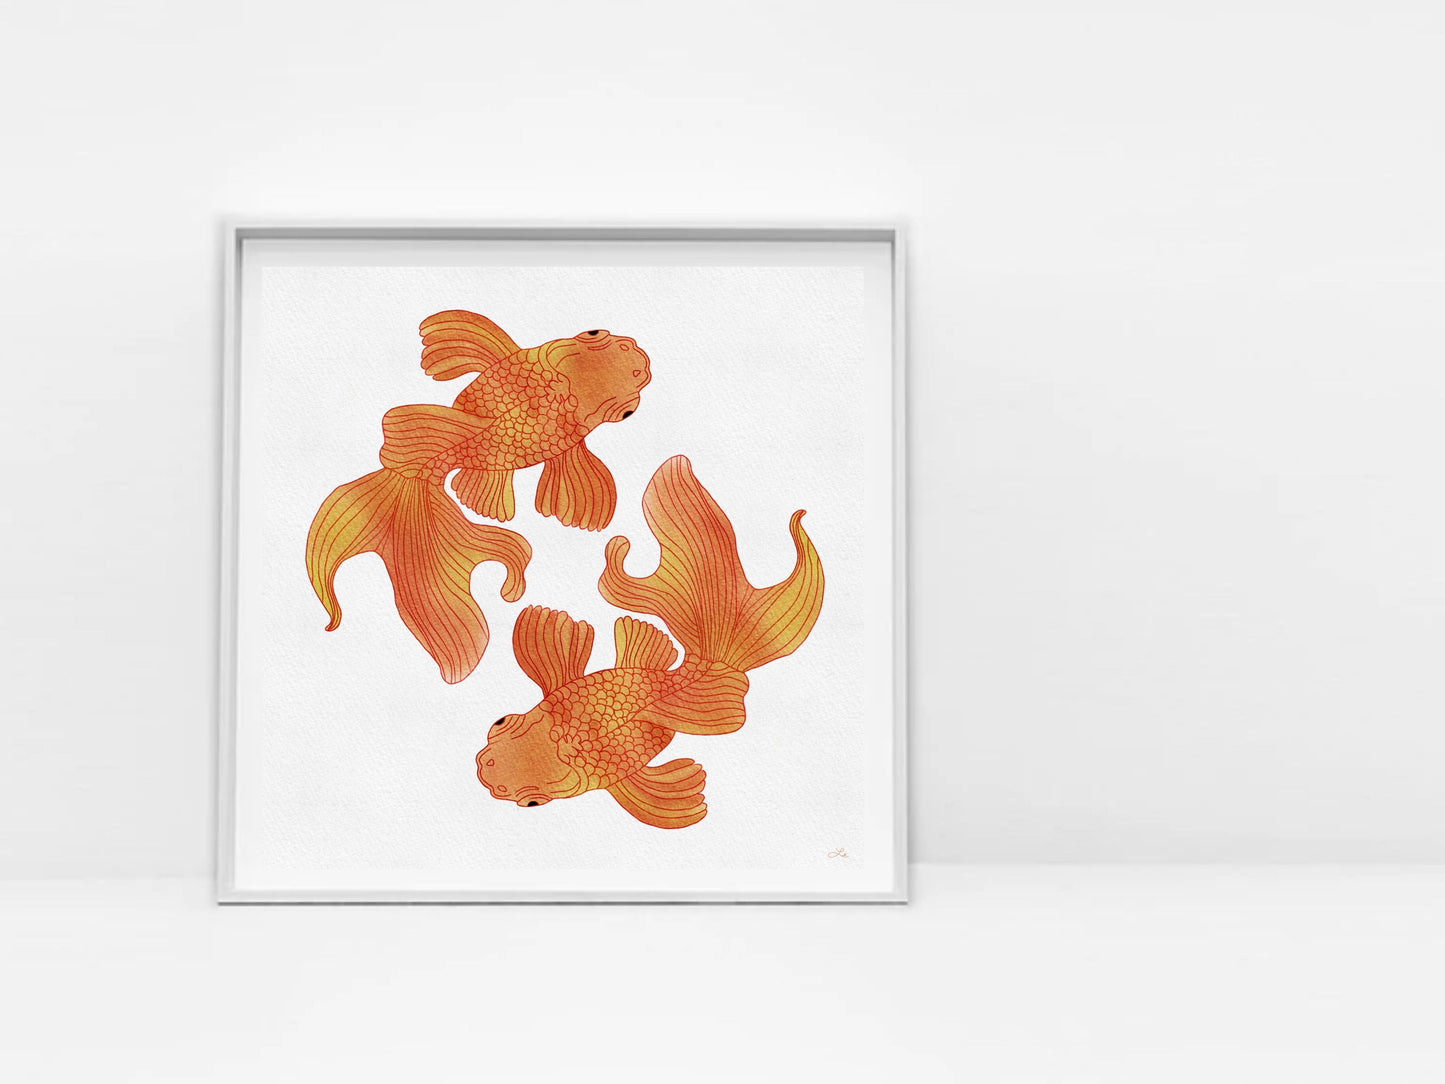 Beautiful art print of two orange goldfish. These goldfish have a detailed line drawing outline with shades of orange and yellow watercolor effects as they appear to be swimming around one another. Struggling to keep those goldfish alive for more than a few days? This wall art will last for as long as you want it! Would be fun to put this piece in the bathroom or in your child's room if you are going for a nautical, underwater, marine or animal theme!